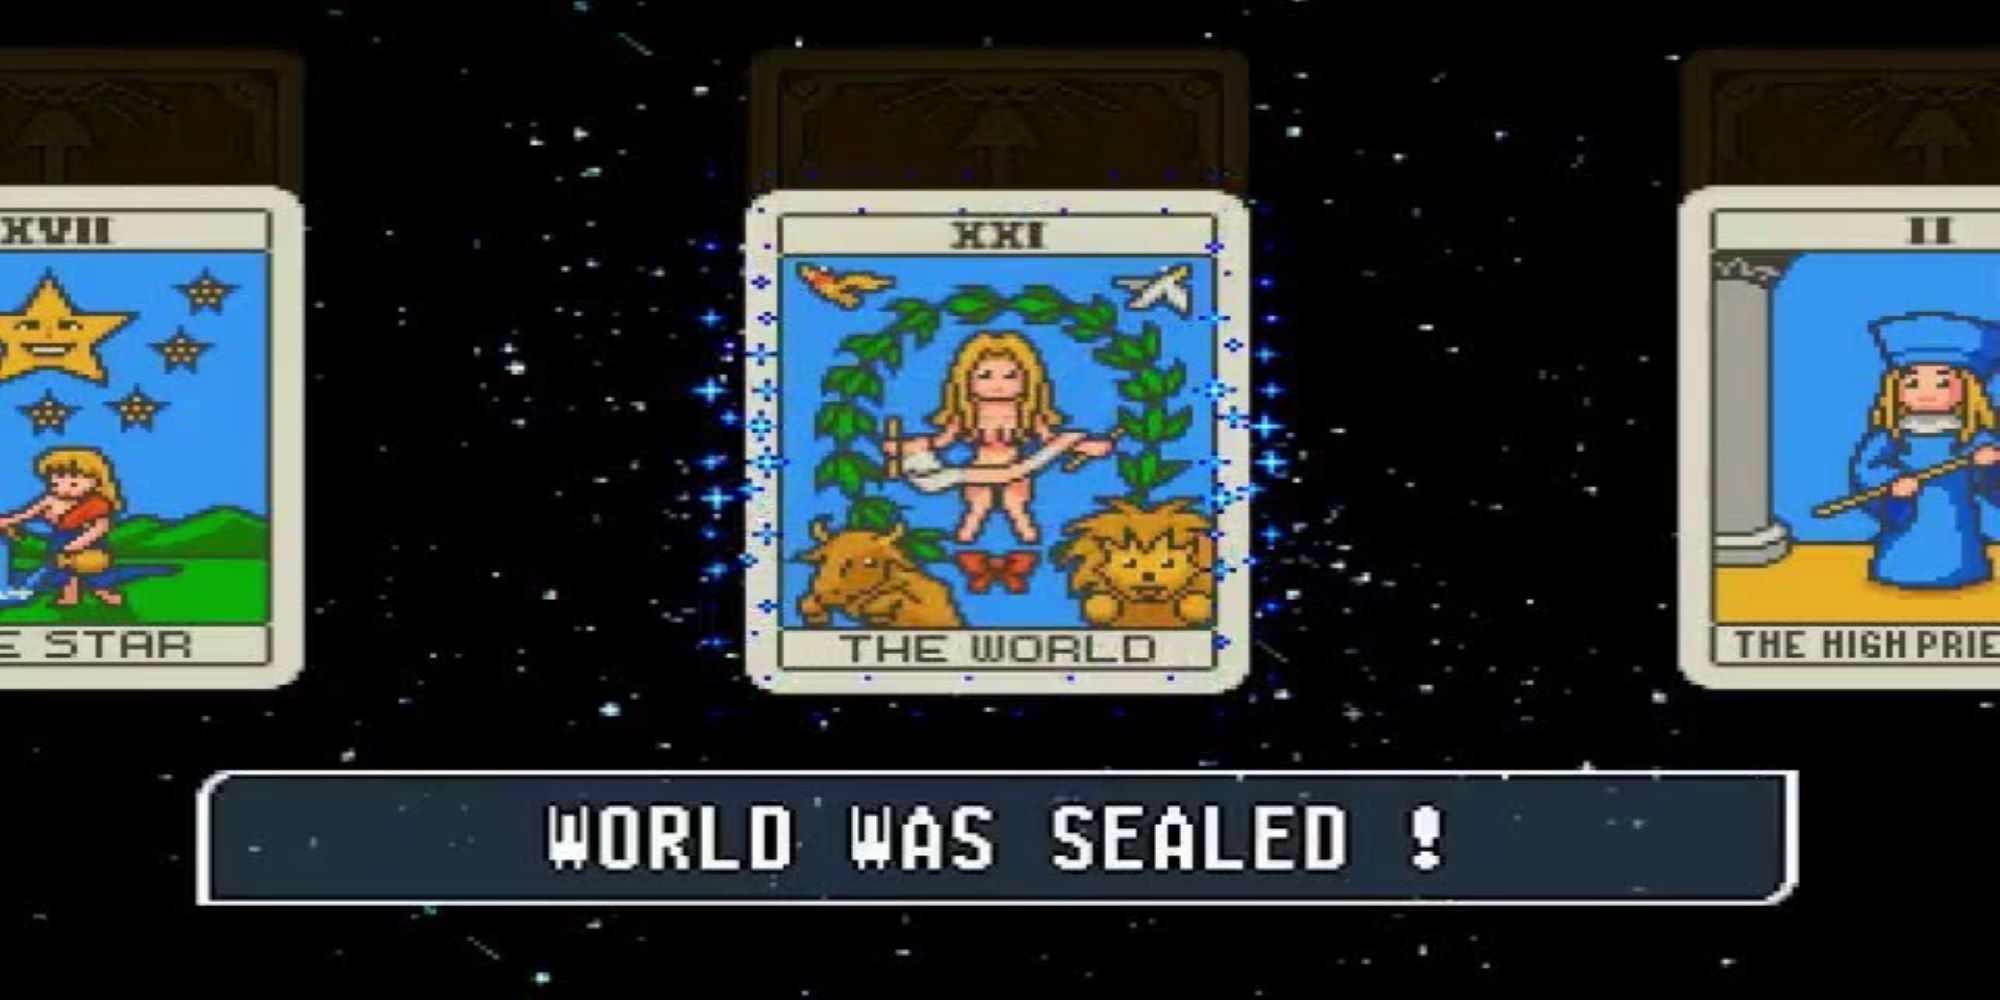 The World tarot card becomes sealed in Puzzle Bobble 4's single-player story mode.